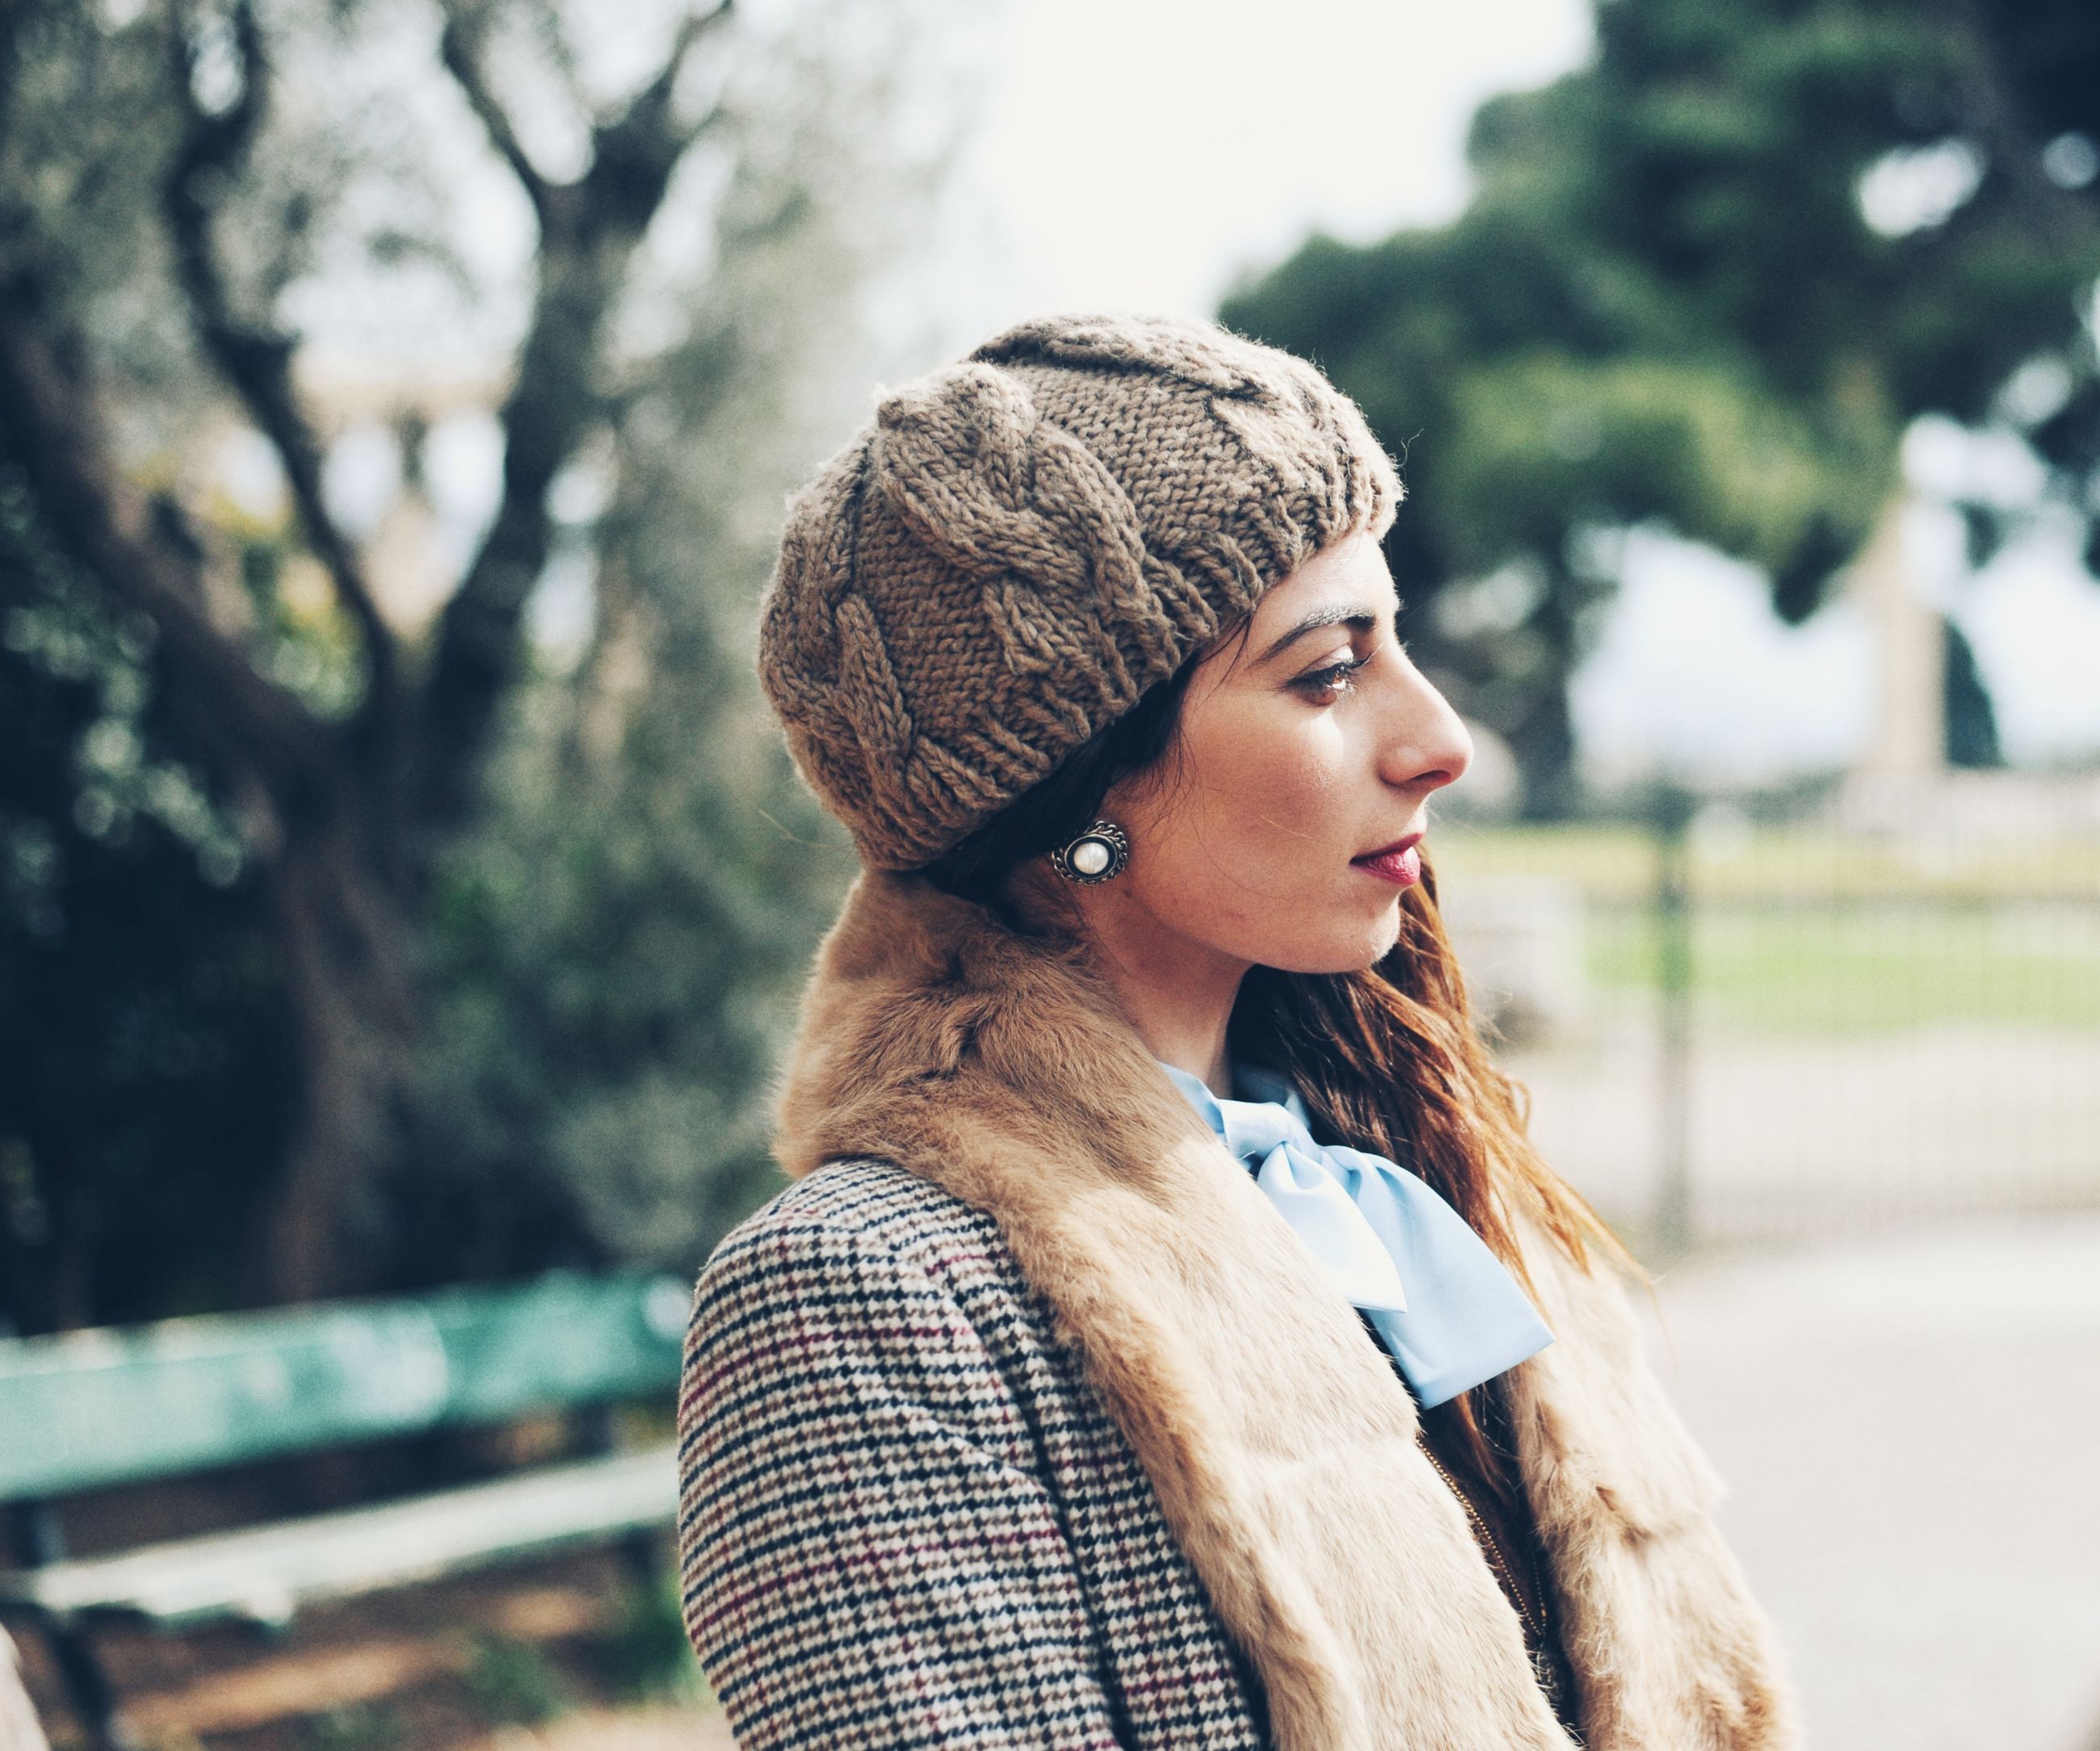 young adult, focus on foreground, one person, leisure activity, real people, young women, lifestyles, hat, clothing, portrait, looking, tree, looking away, women, adult, standing, waist up, day, beautiful woman, contemplation, warm clothing, outdoors, hairstyle, teenager